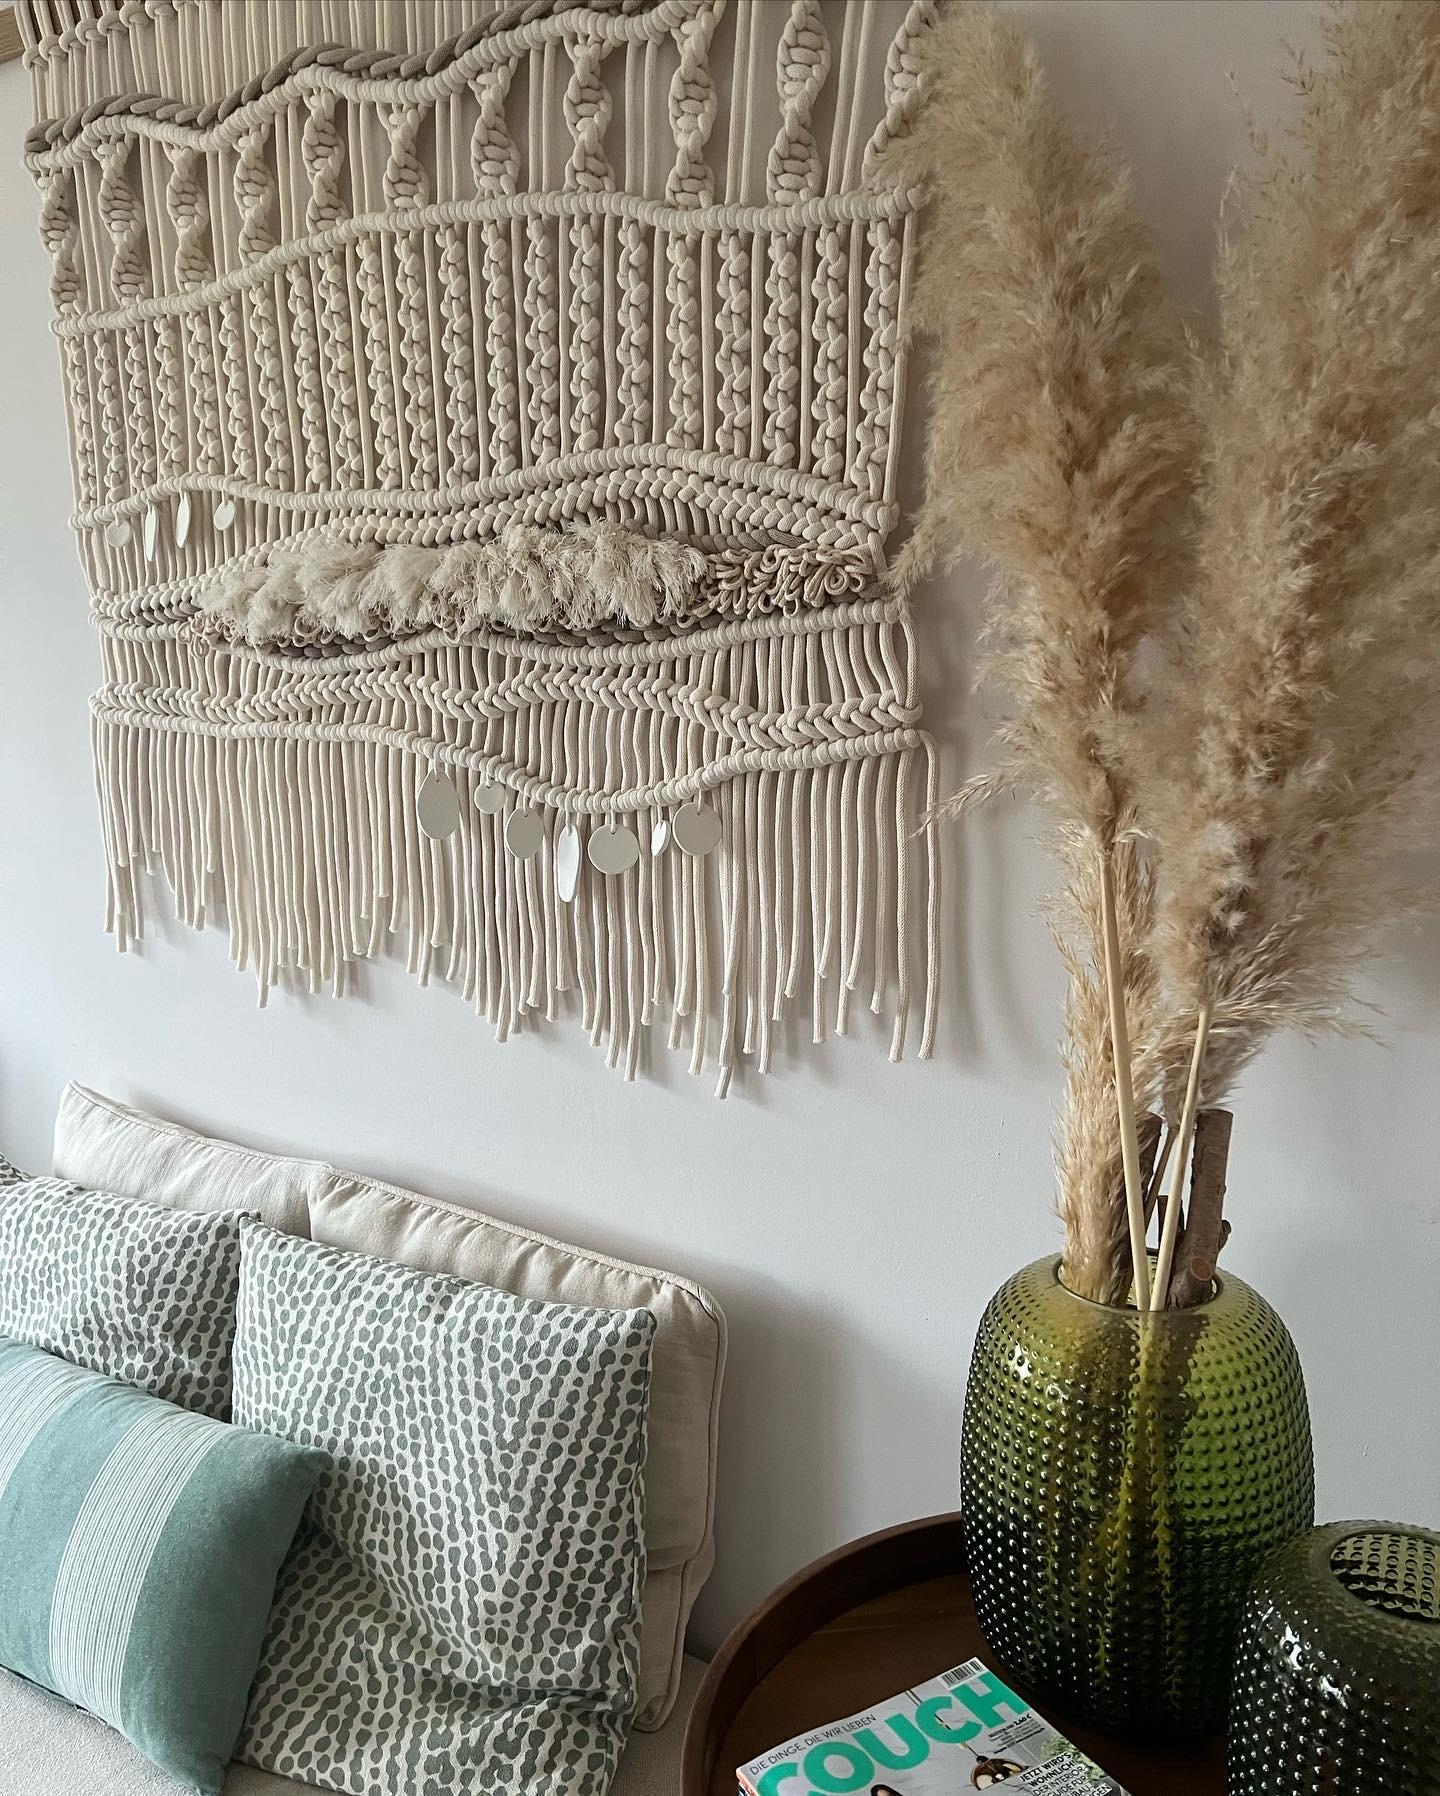 My macramé wall hanging Marycocrafts, natural and monochromatic with couch magazines as part of the deco.